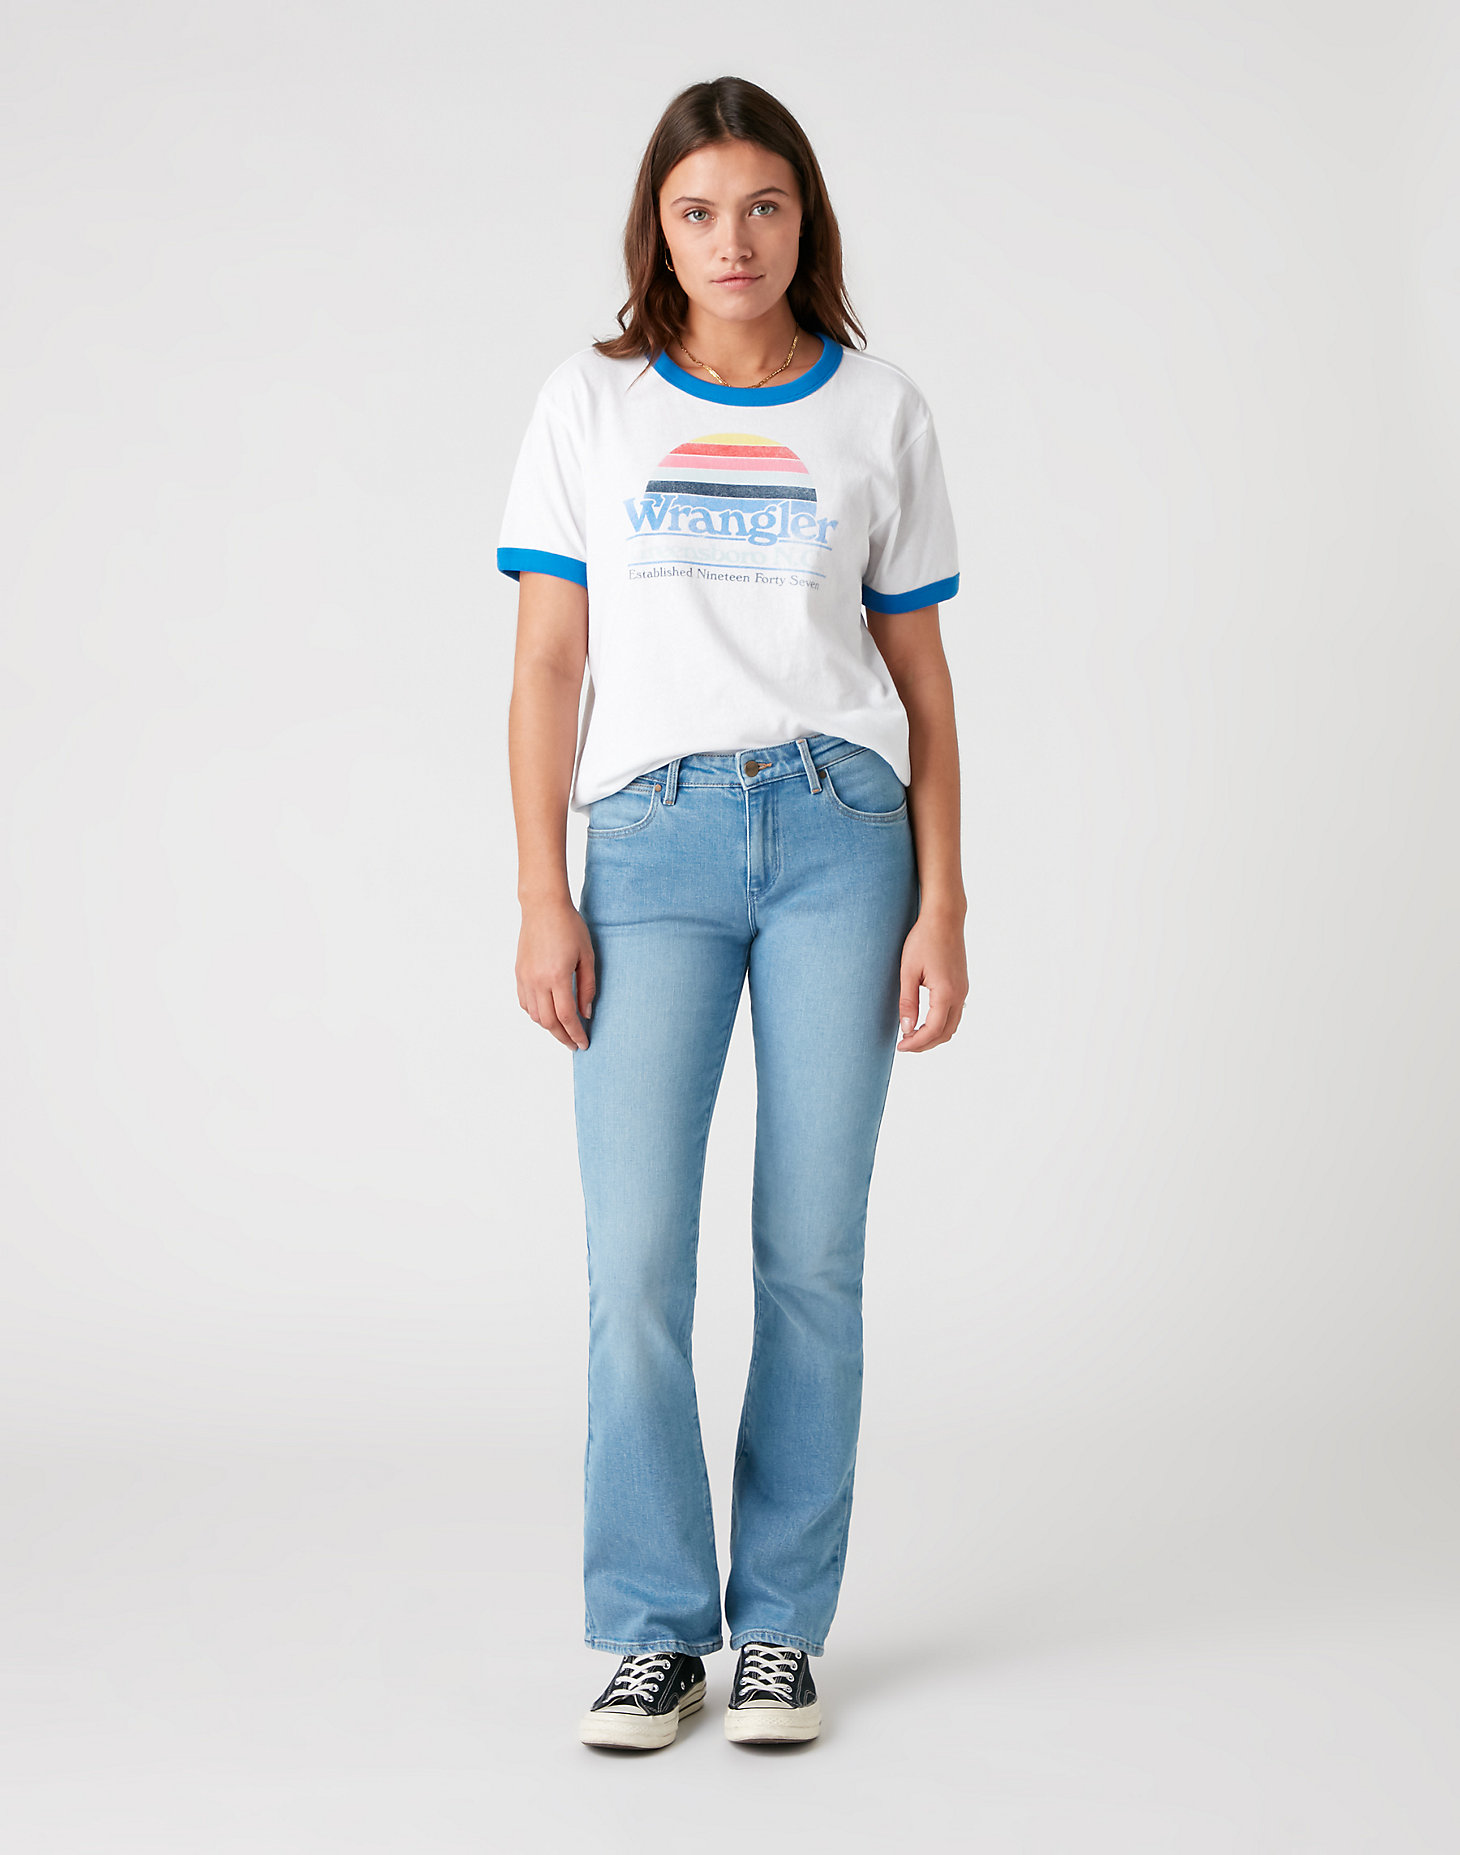 Relaxed Ringer Tee in White alternative view 1